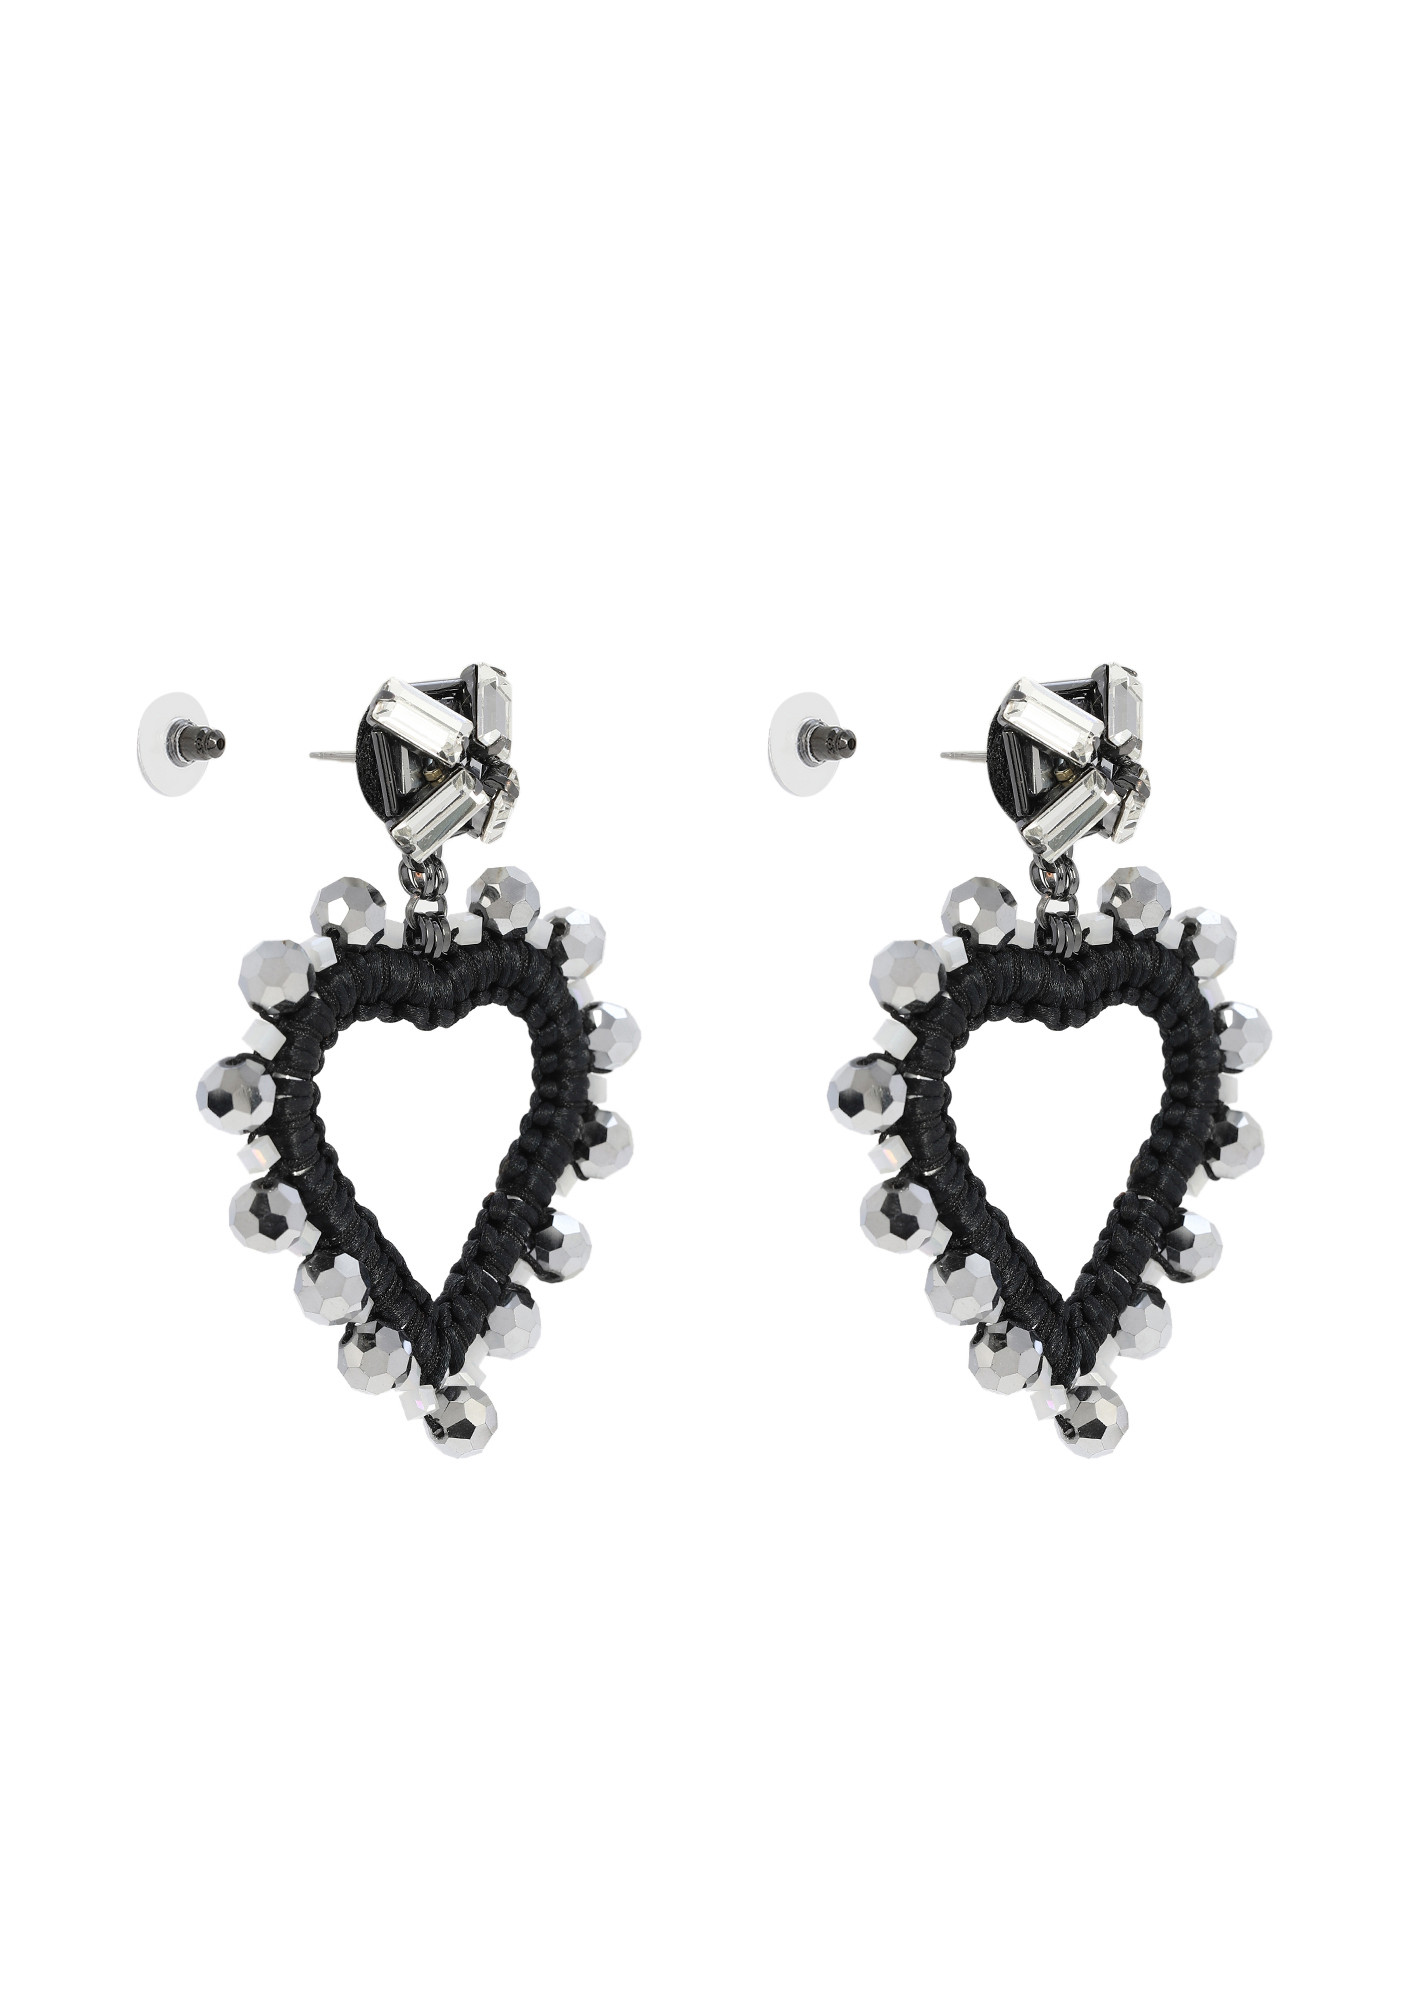 Buy Gold and Black Heart Earrings Online in India  Etsy